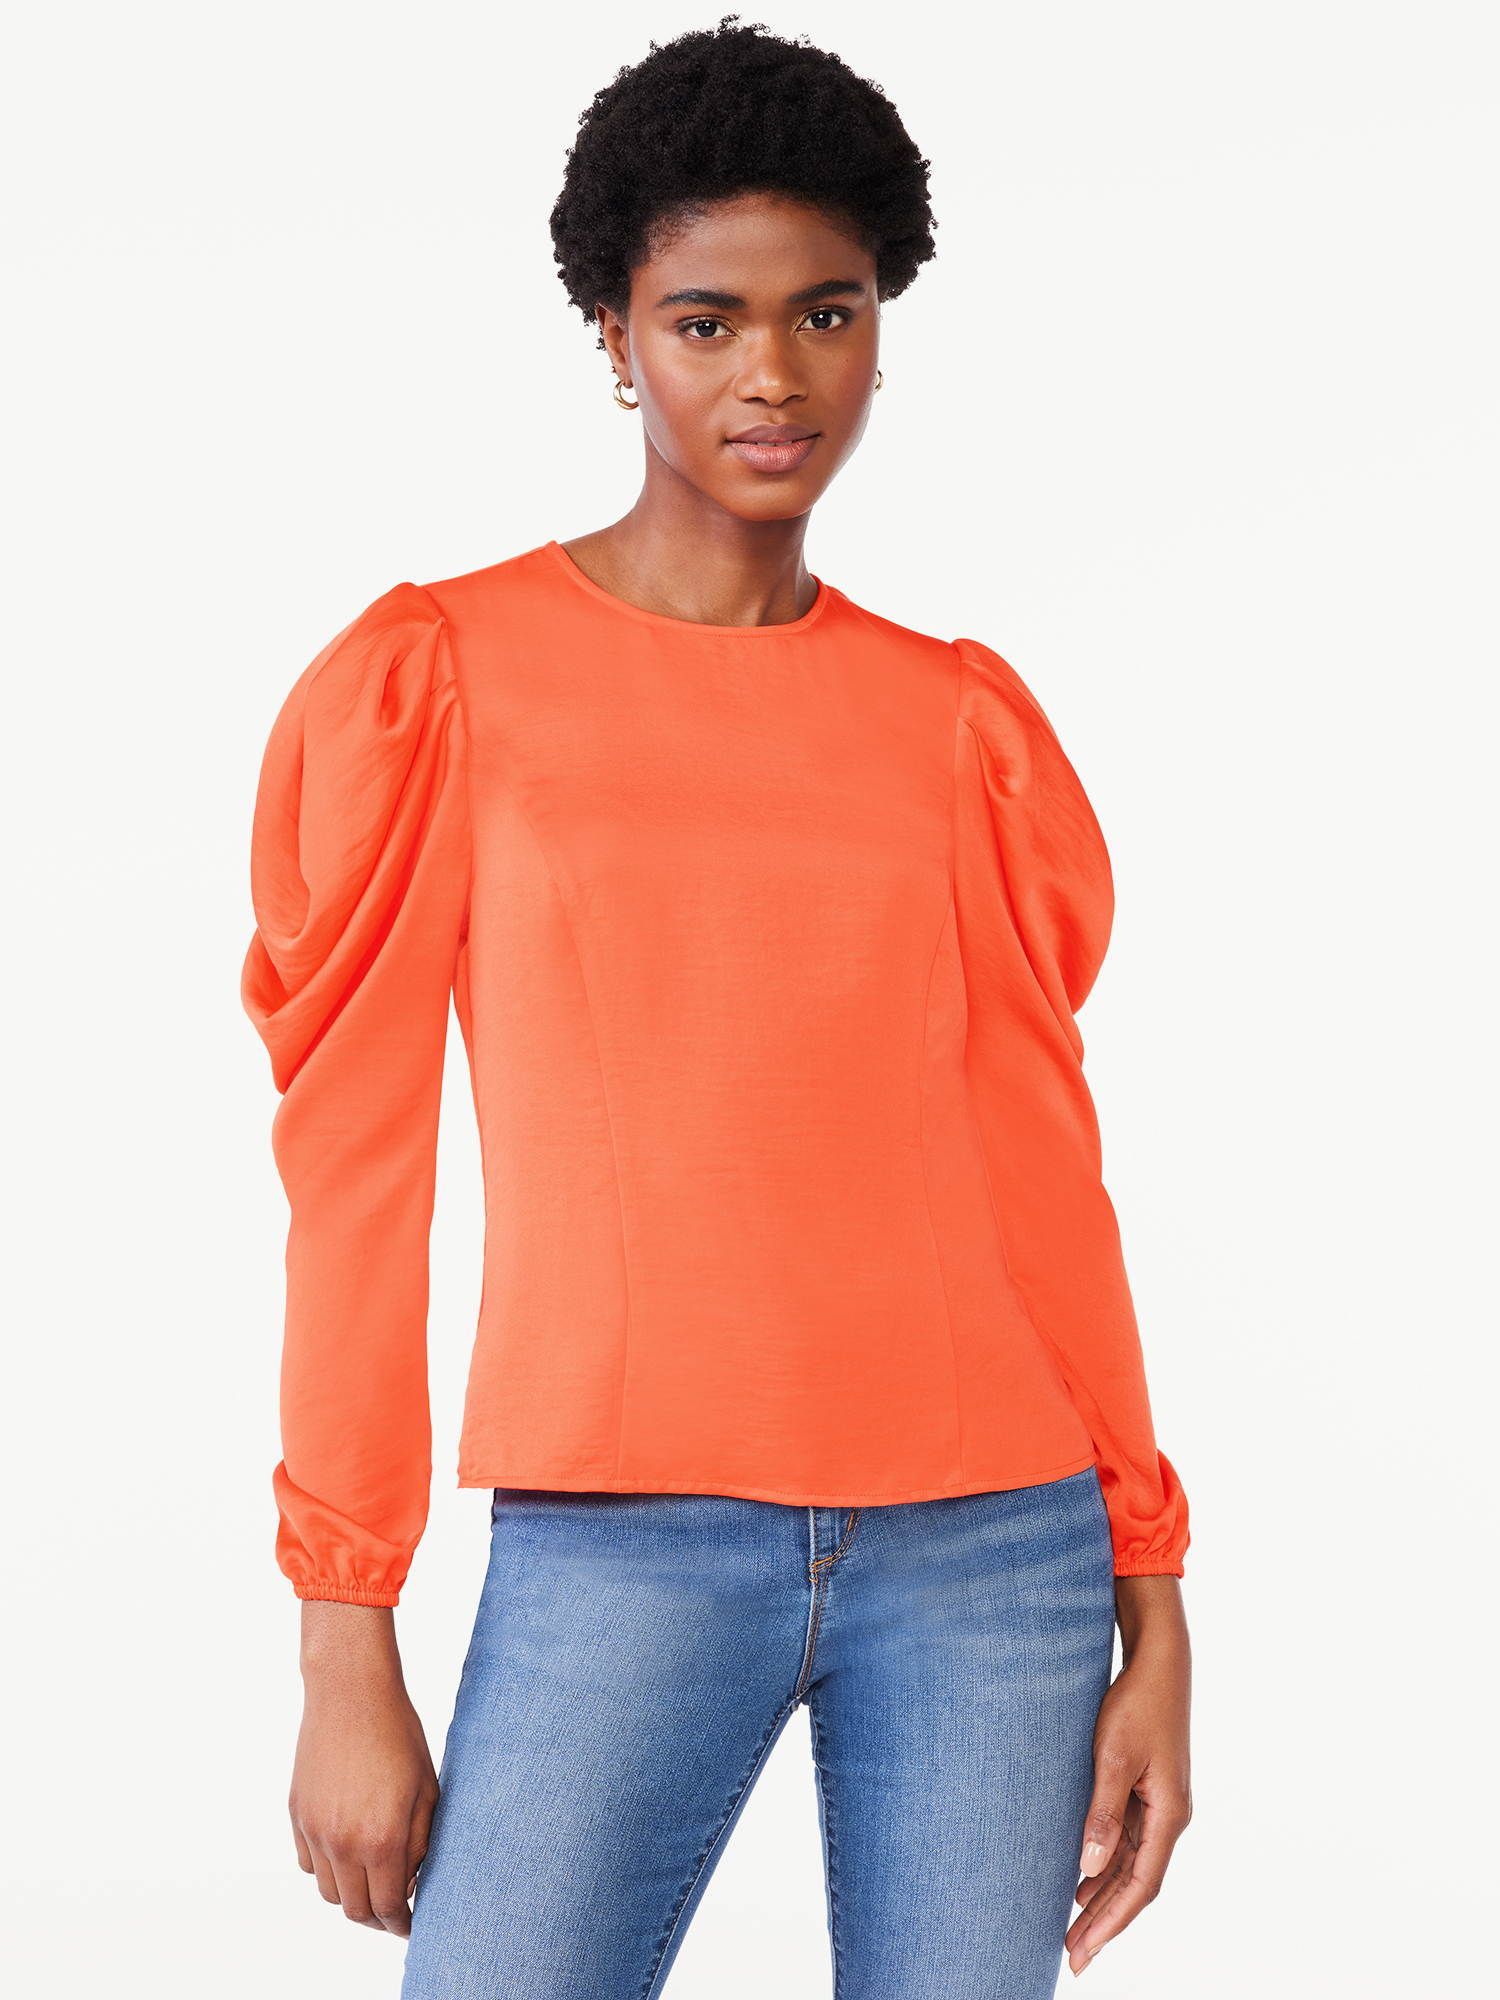 Scoop Women's Top with Blouson Sleeves, Sizes XS-XXL - image 1 of 5